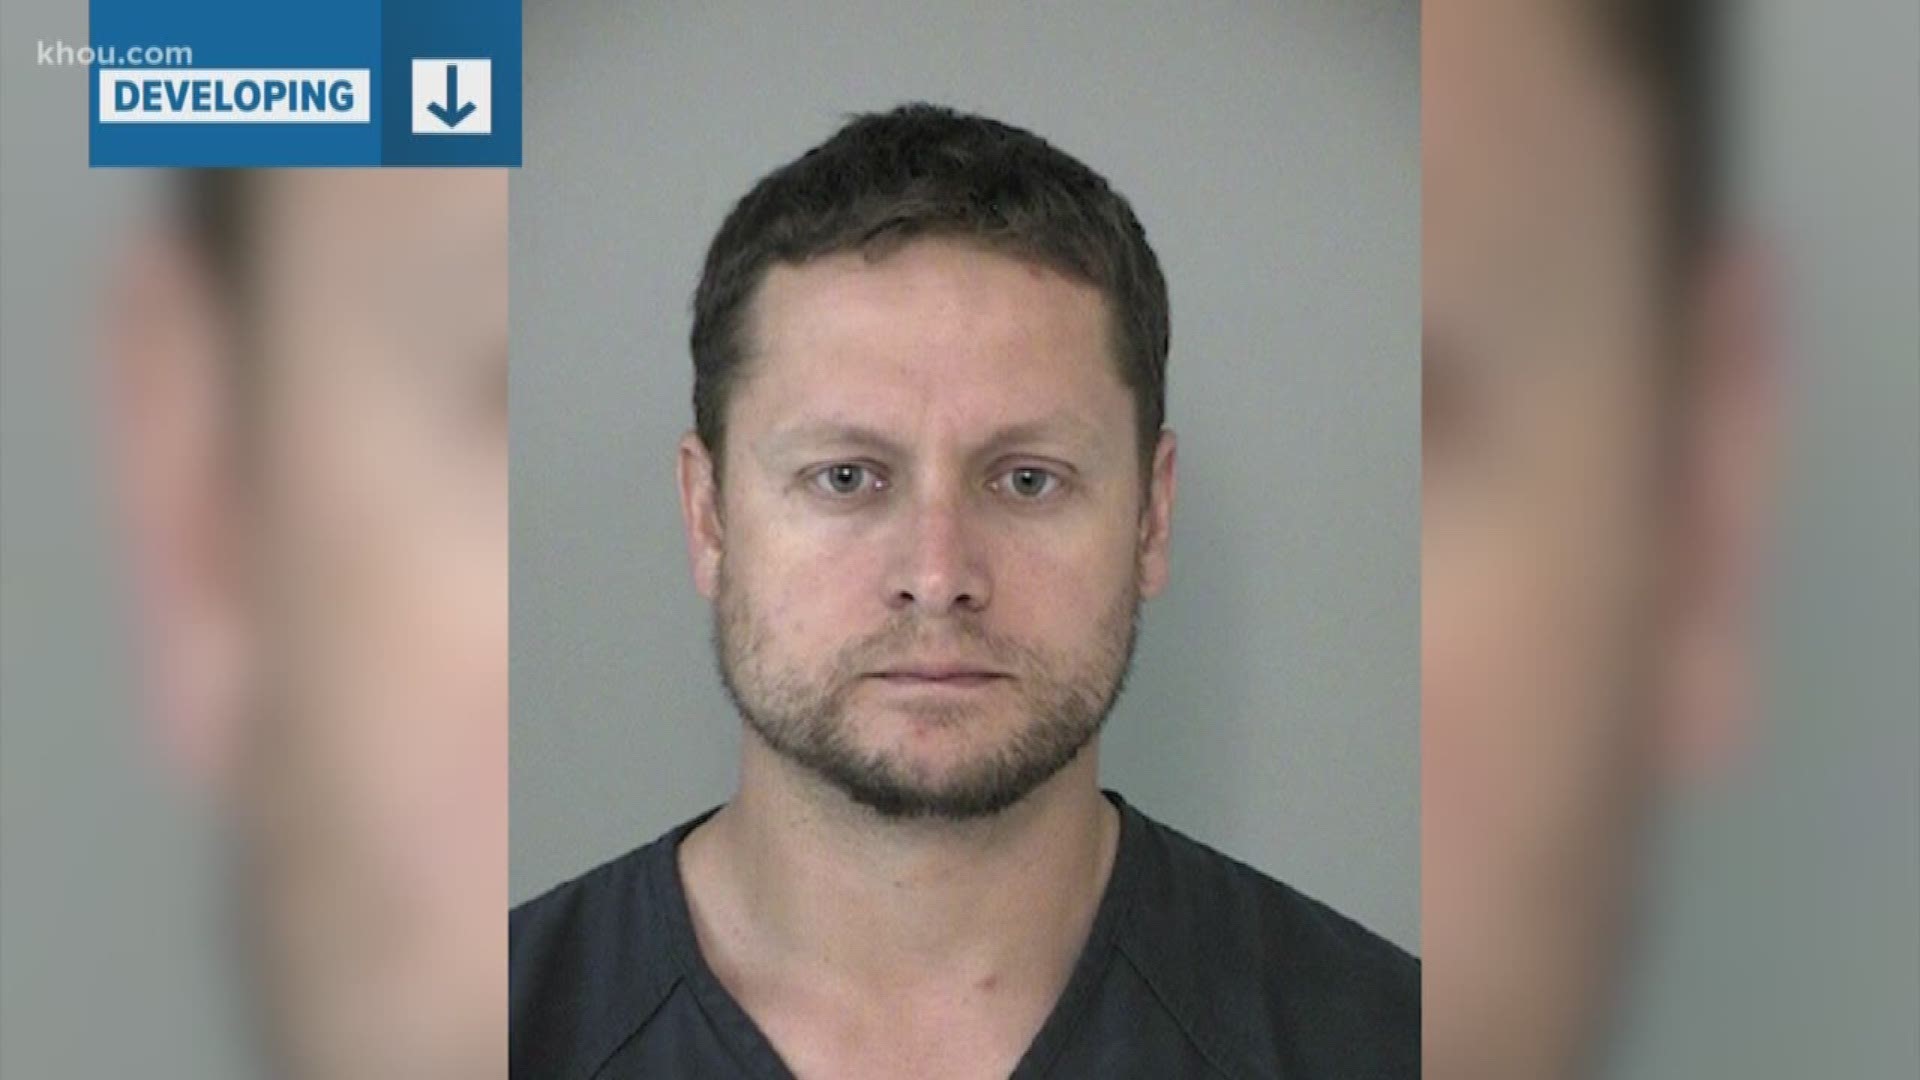 A Katy ISD employee has been arrested and charged with possession of child pornography.